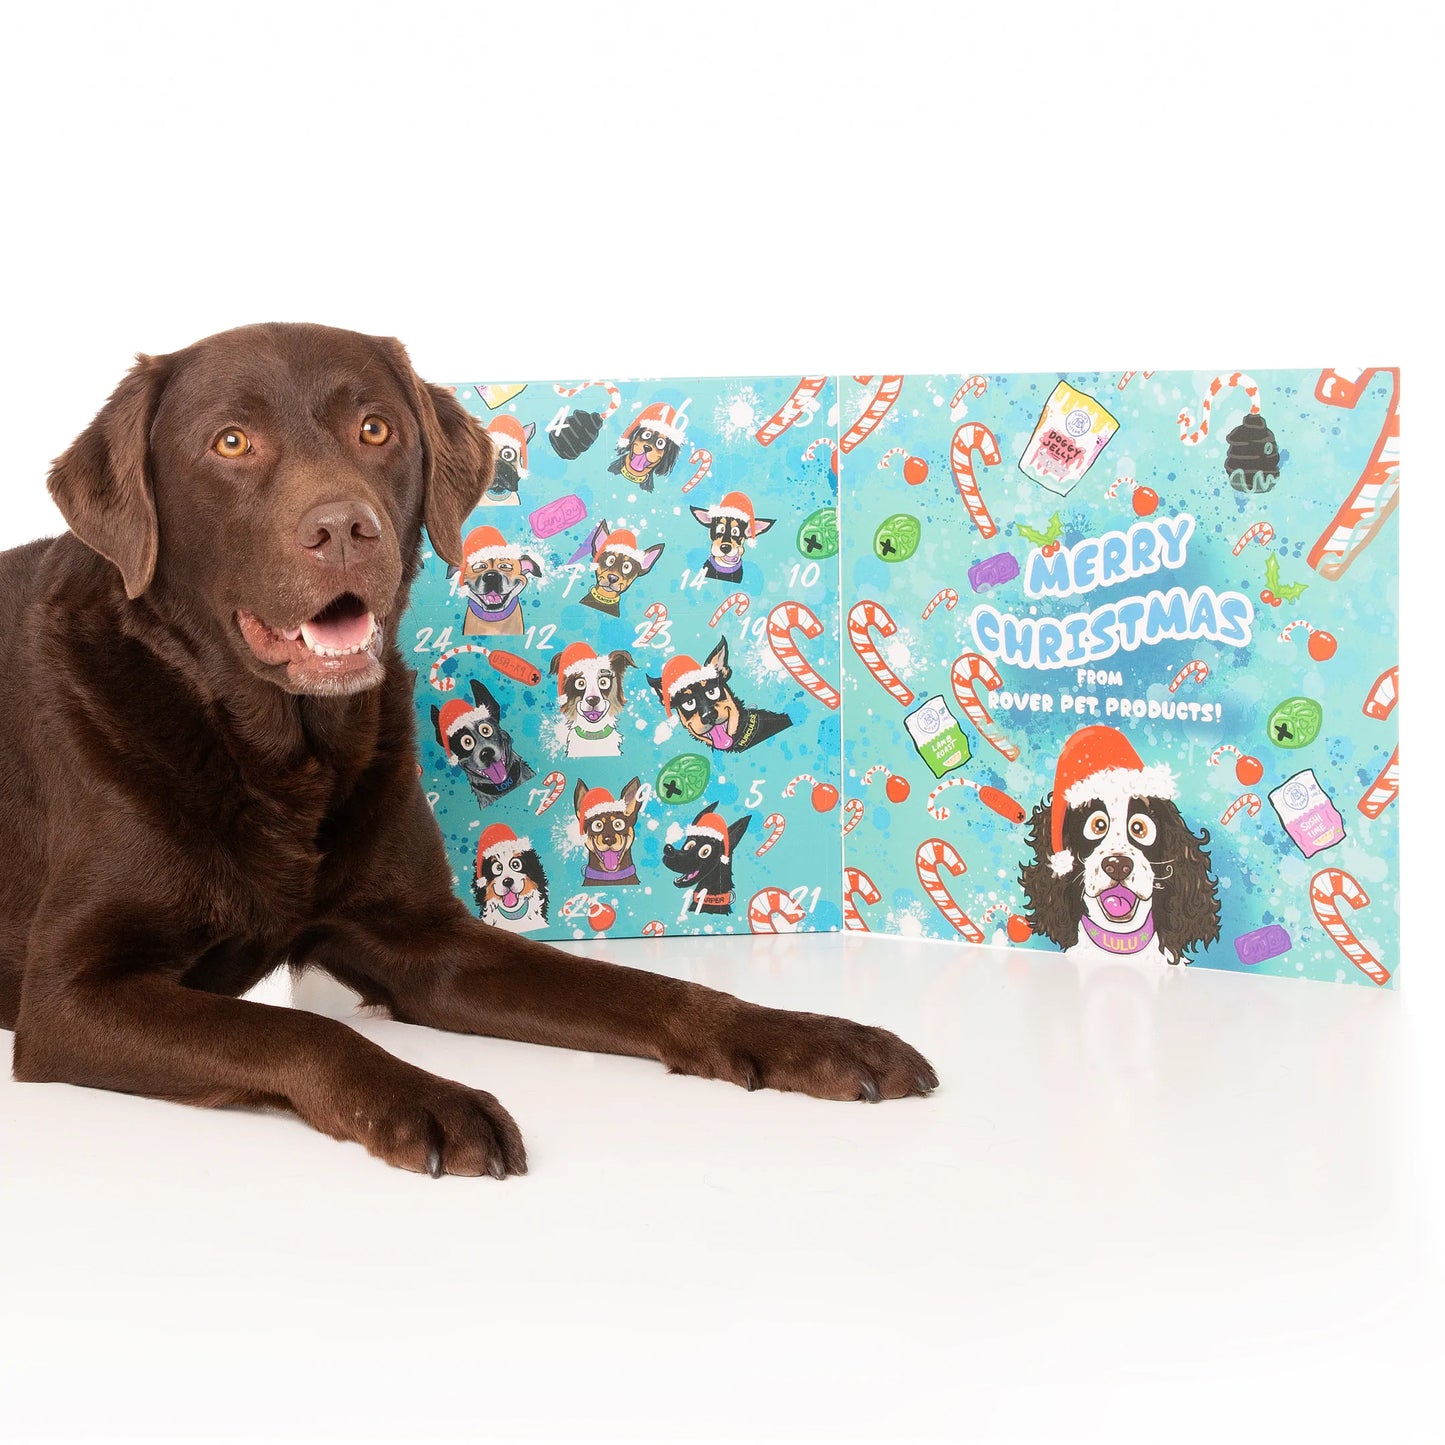 Rover Pet Products Christmas Advent Calendar 2022